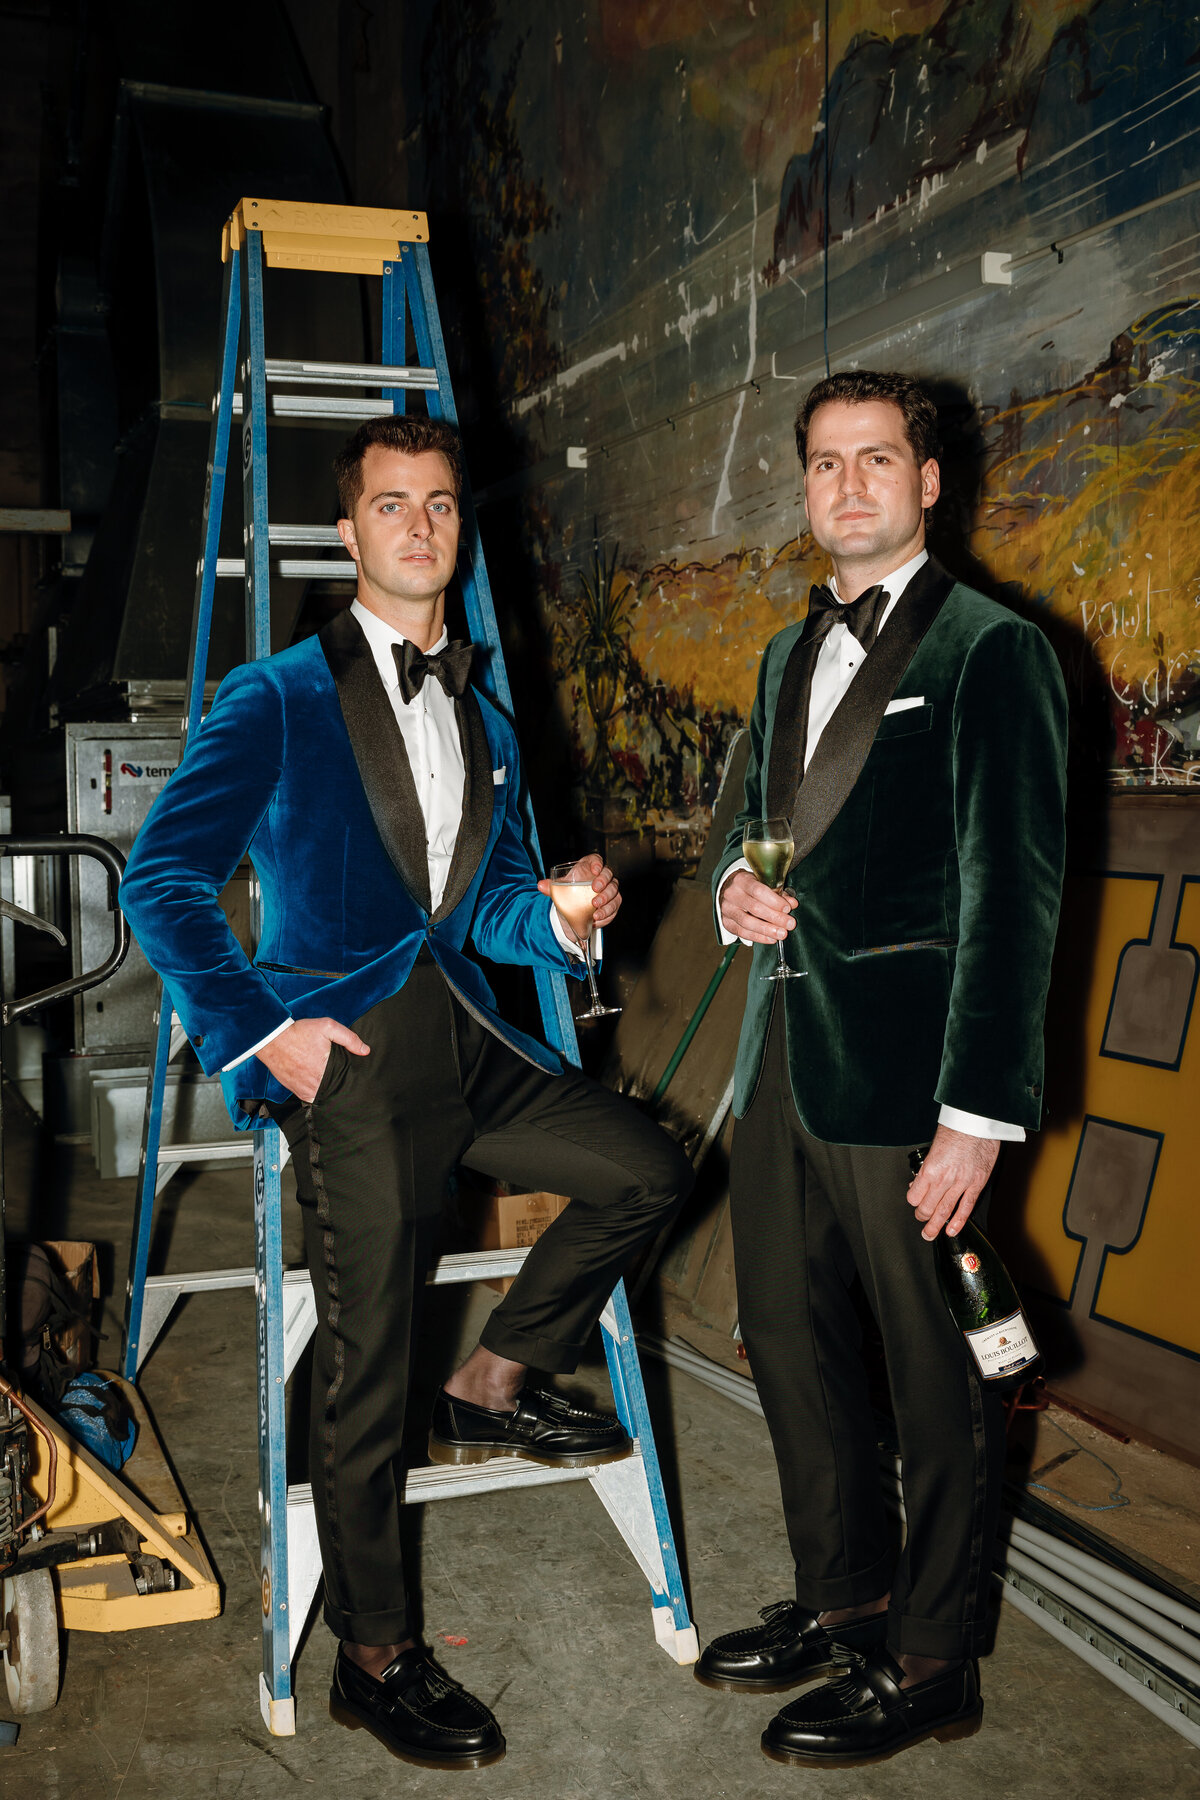 Flash photography of two grooms in their velvet suits at the backstage of Regal Cinema.